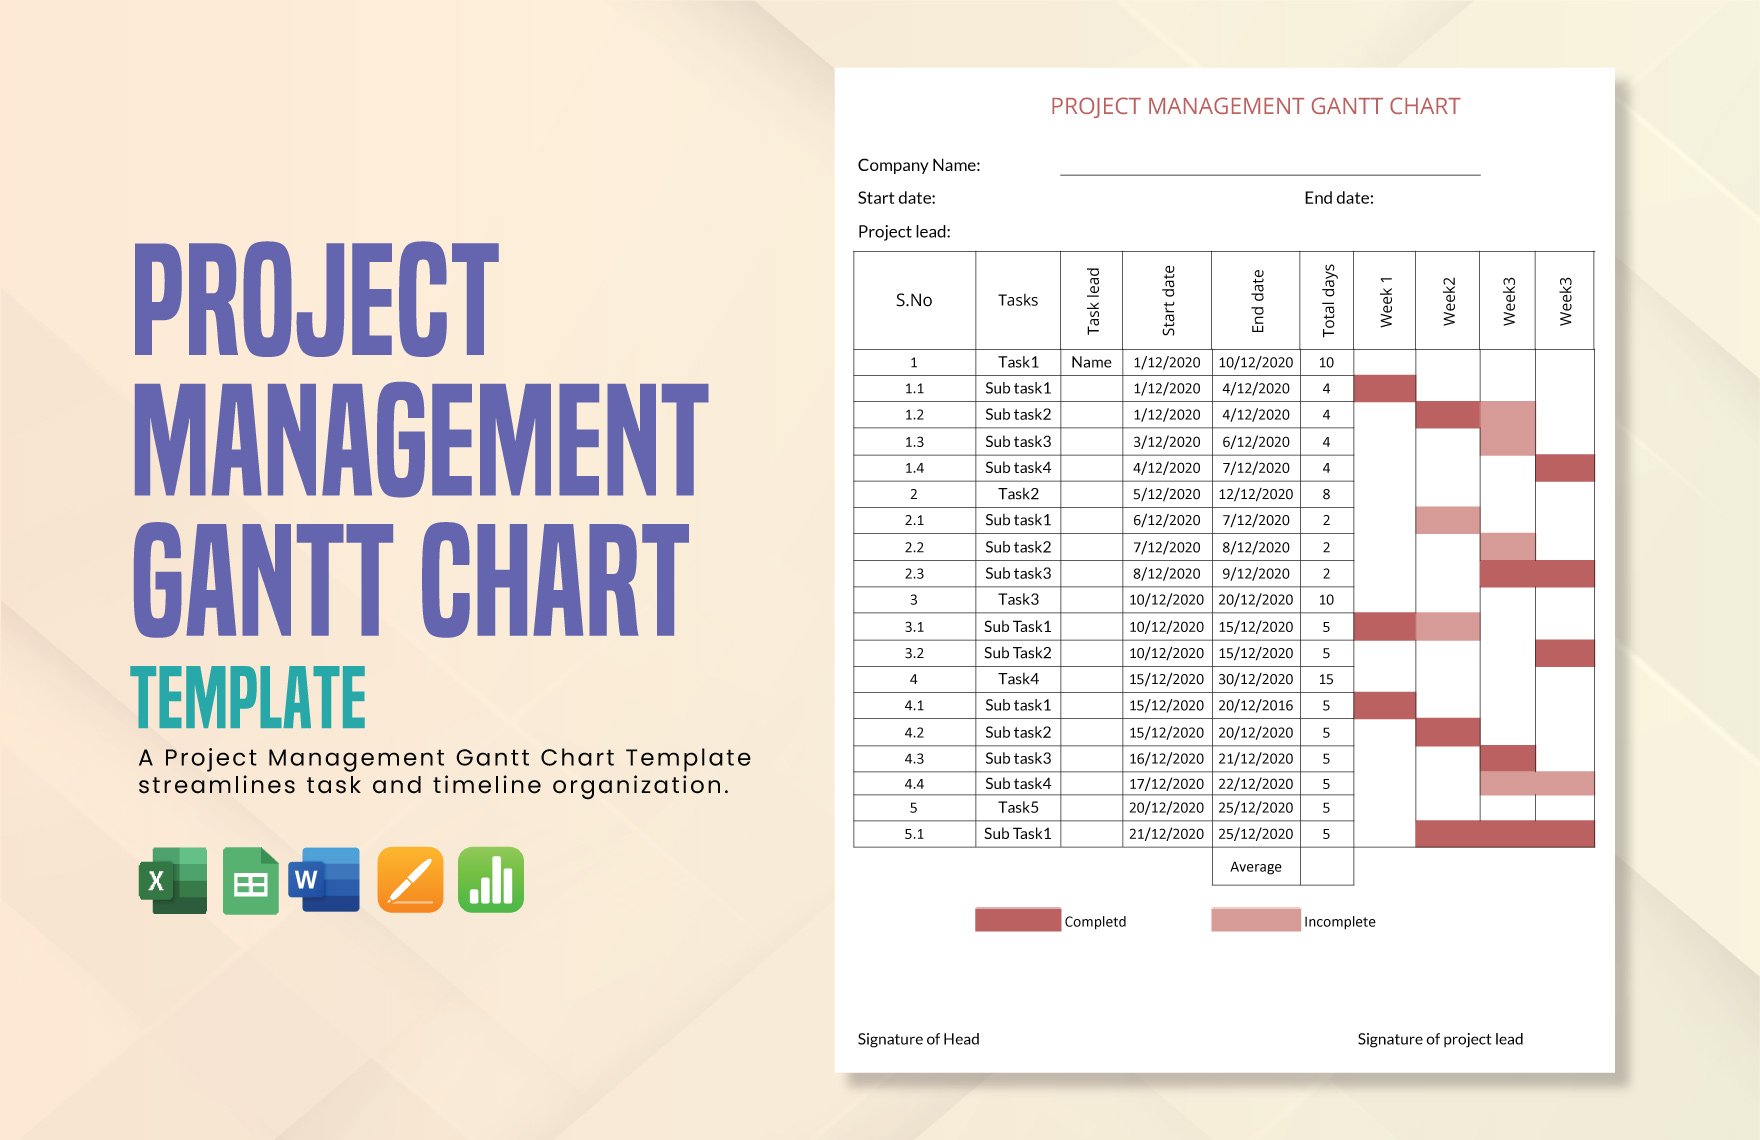 Project Management Gantt Chart Template in Word, Excel, Google Sheets, Apple Pages, Apple Numbers